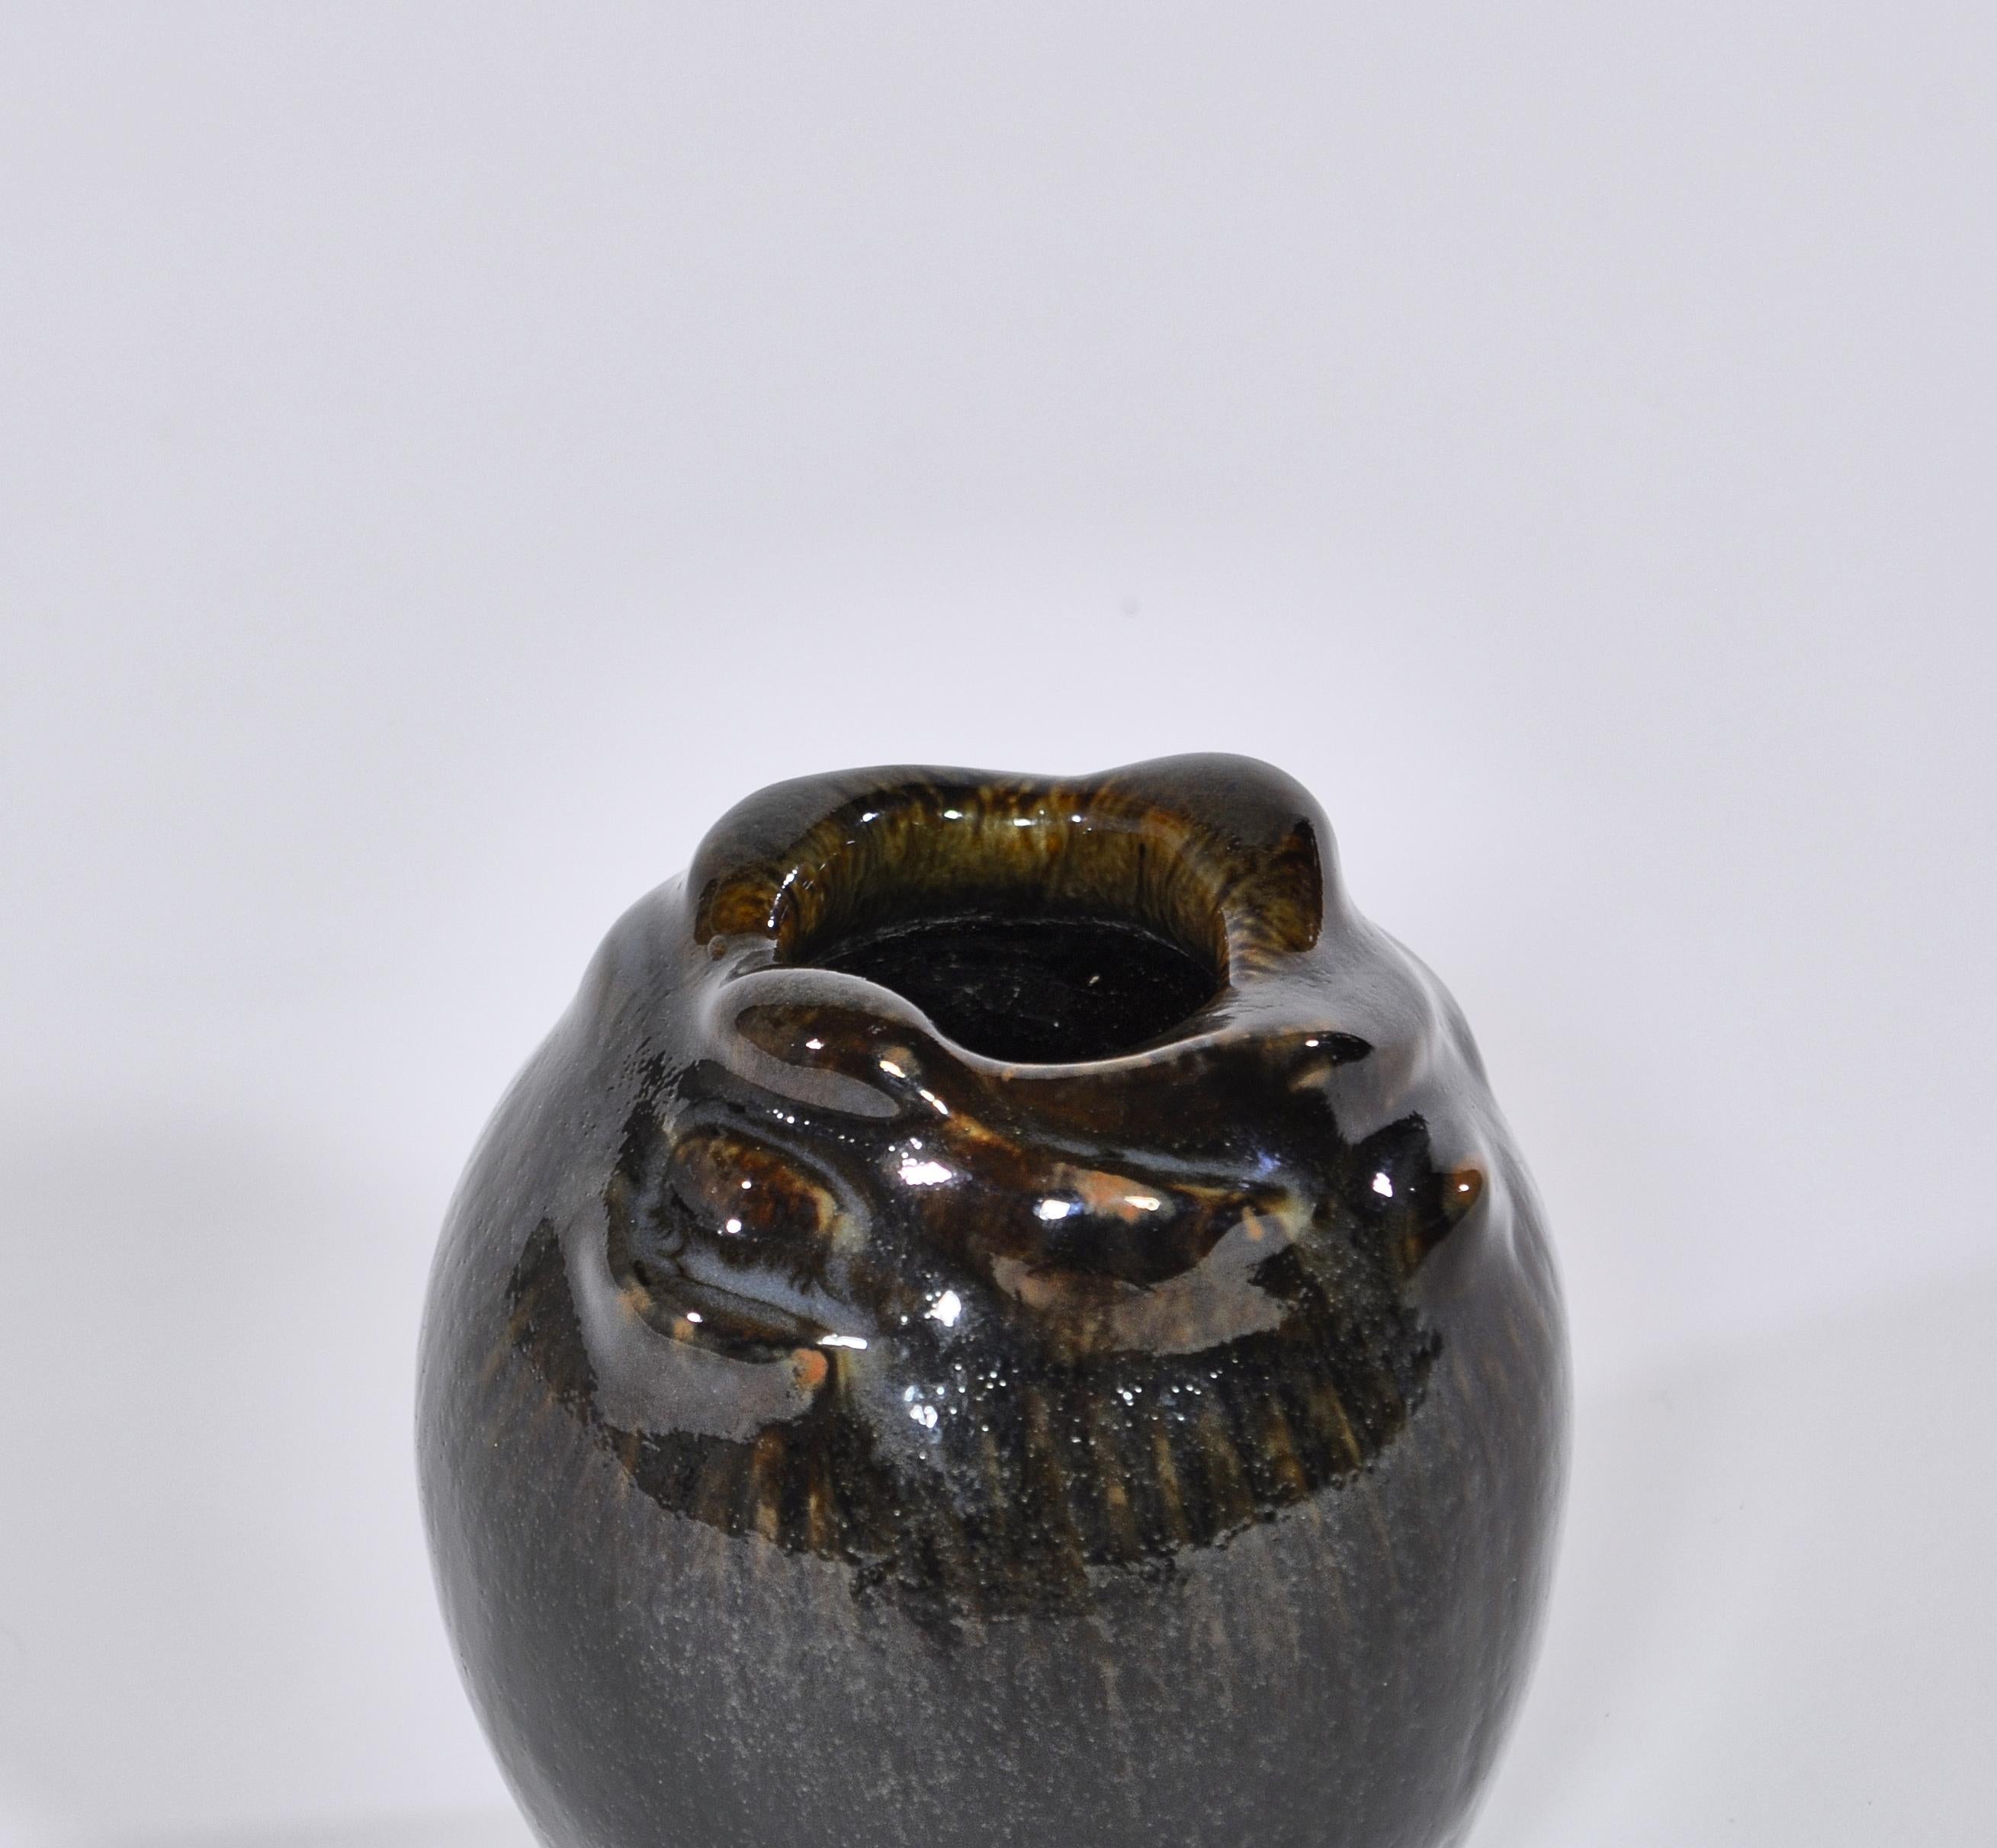 Stunning stoneware vase from 1957 by Danish artist Axel Salto. Beautiful dark brown glaze. Factory first in mint condition. Signed.